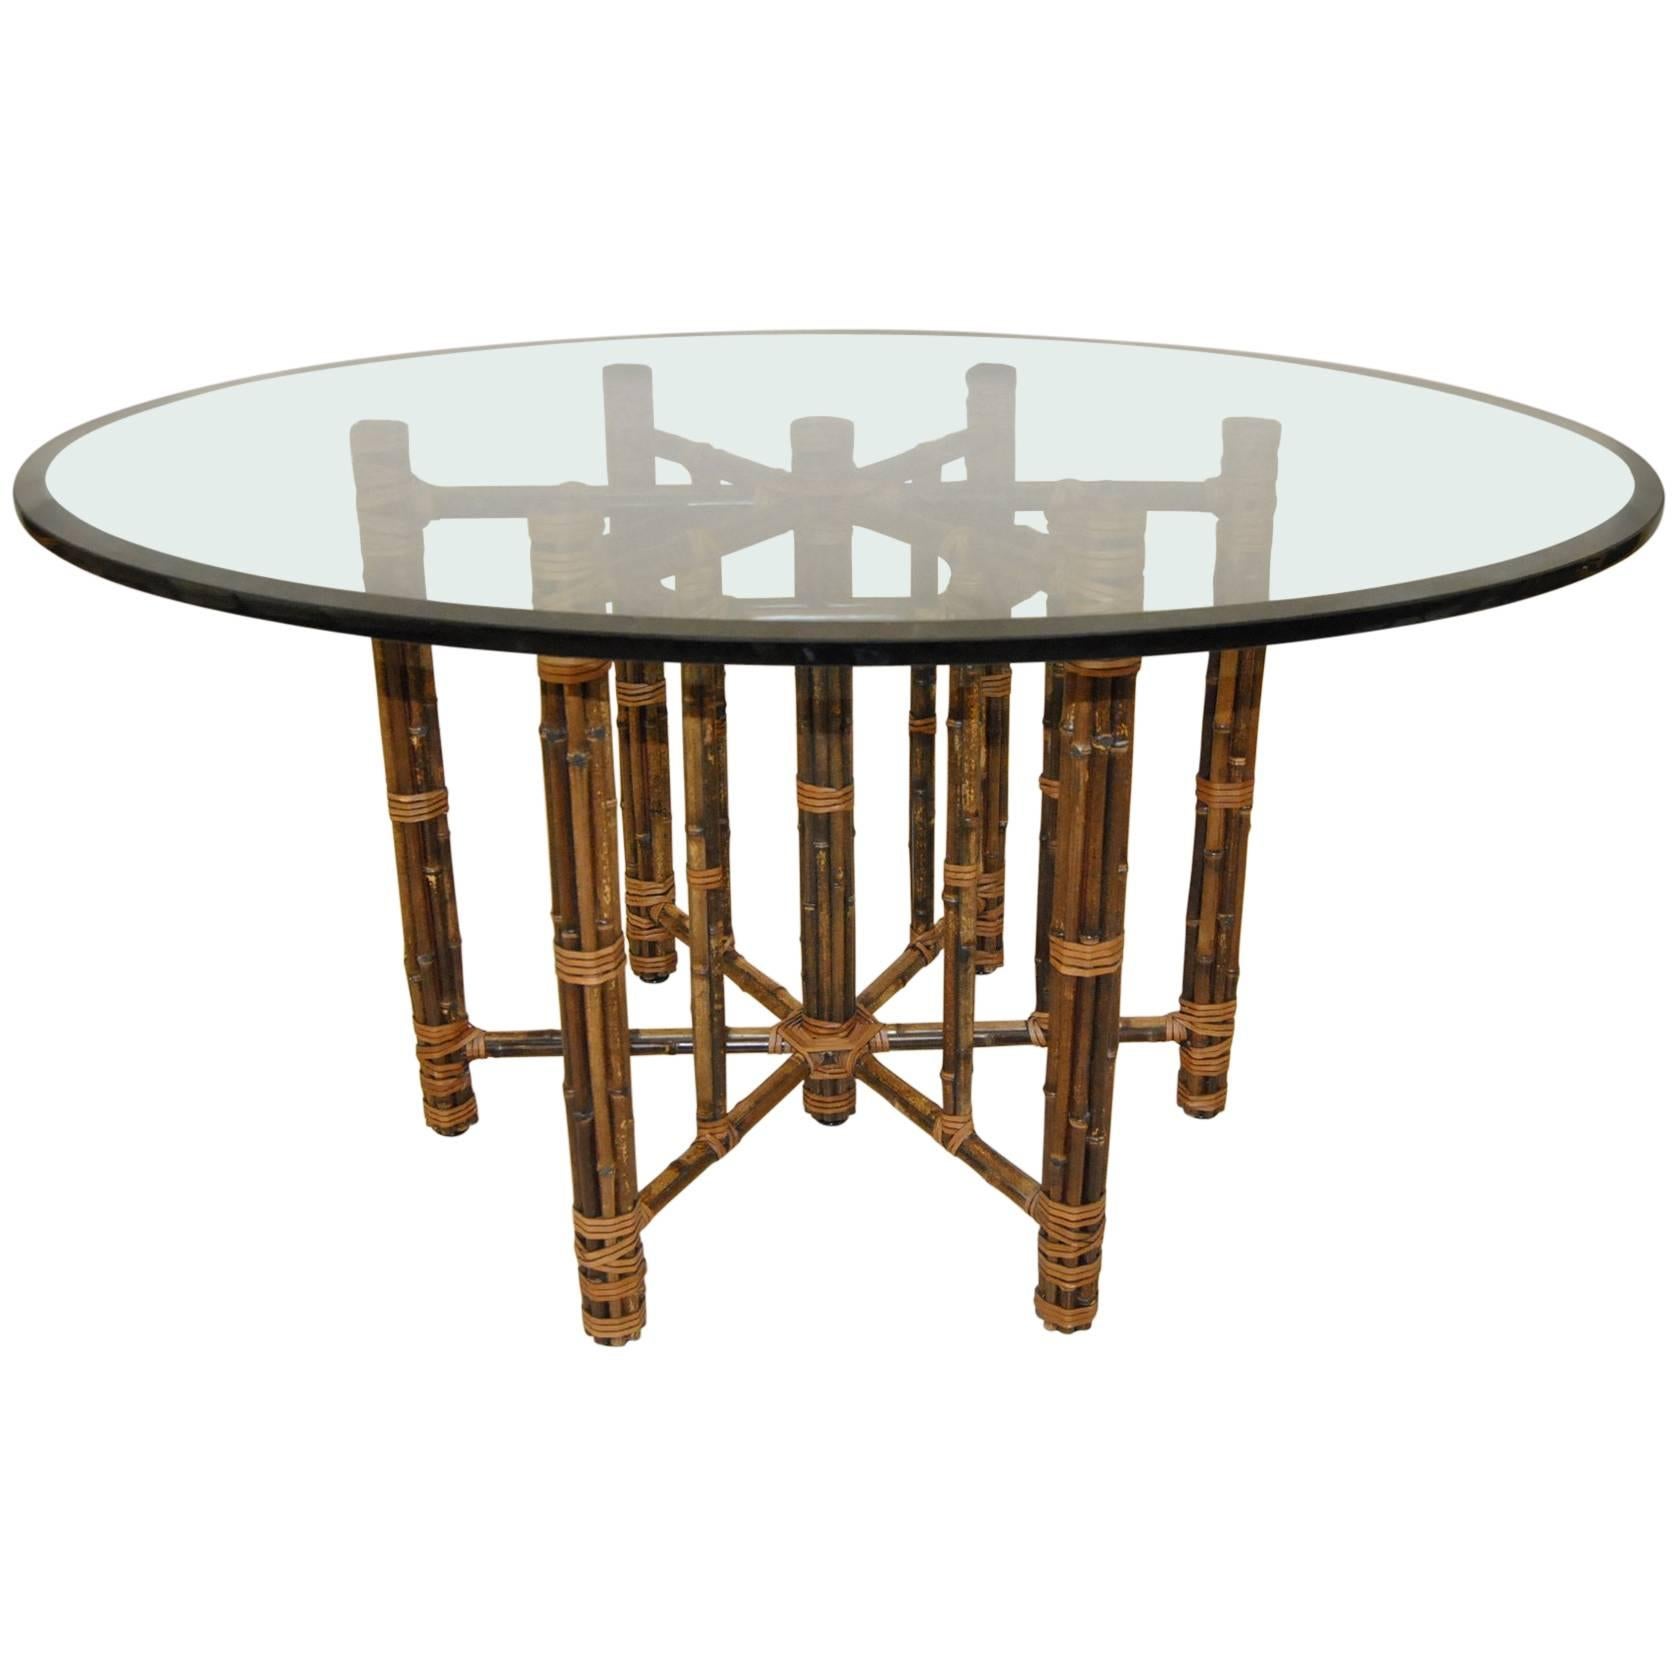 Glass Top Rattan Round Dining Table by McGuire